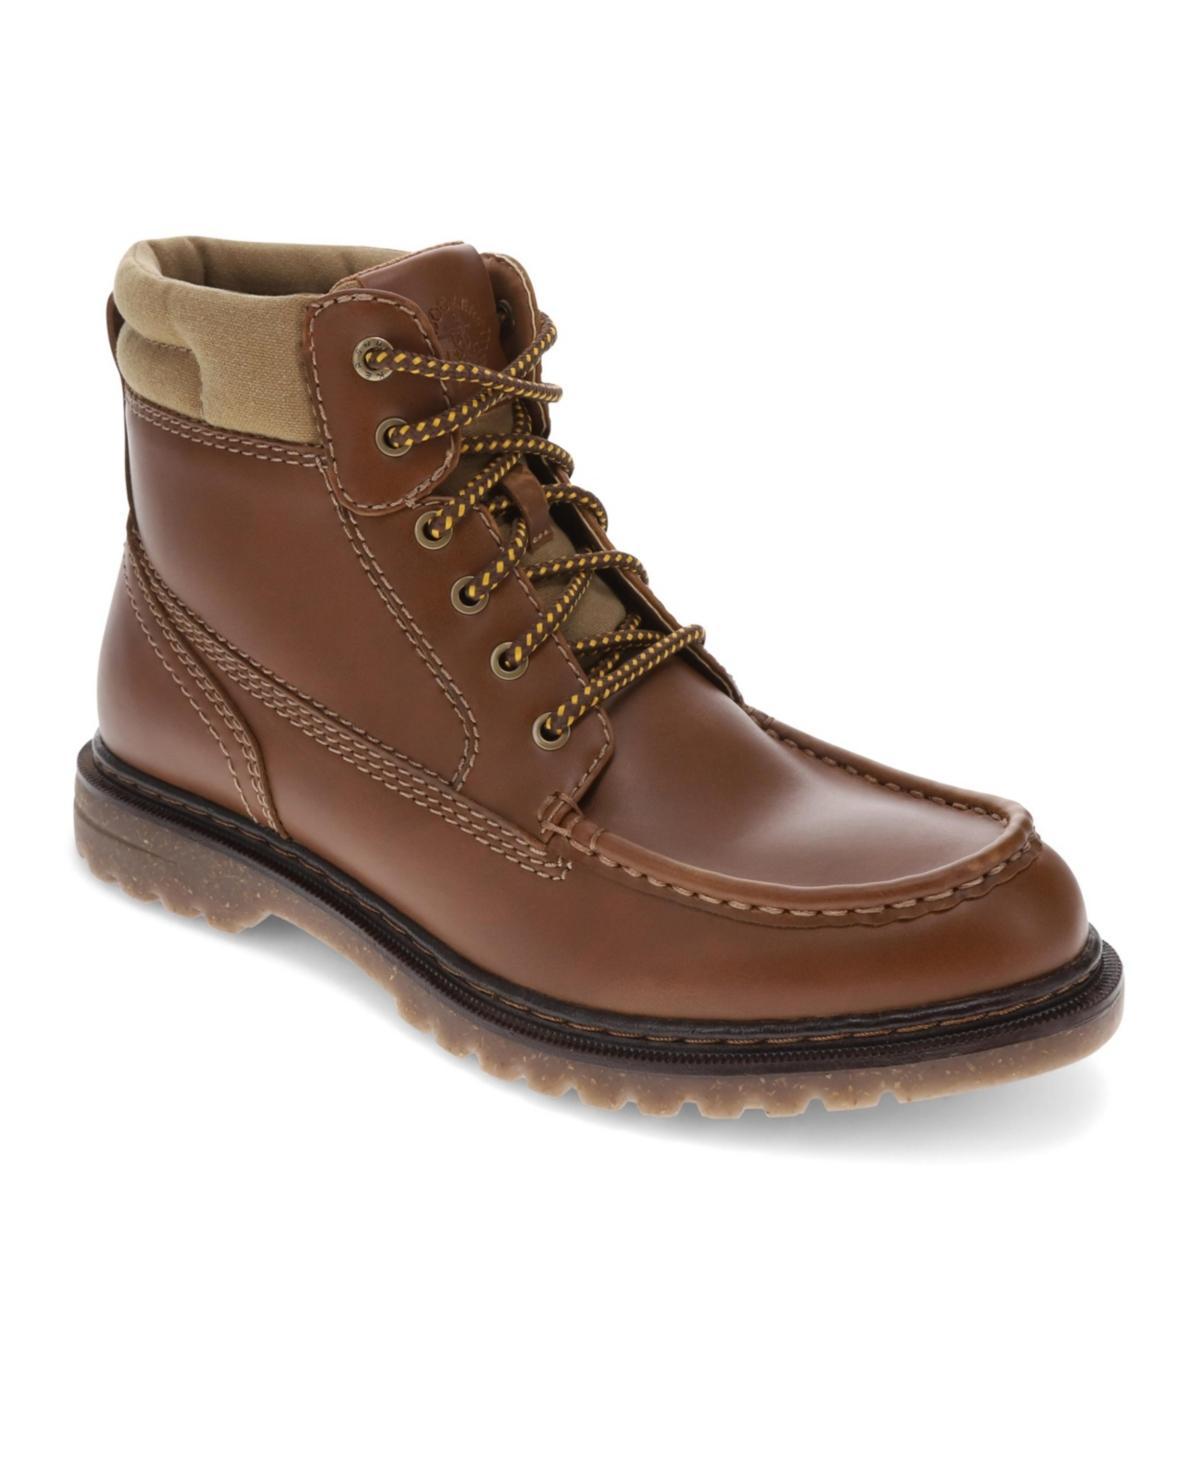 Dockers Mens Rockford Boots Brown Product Image